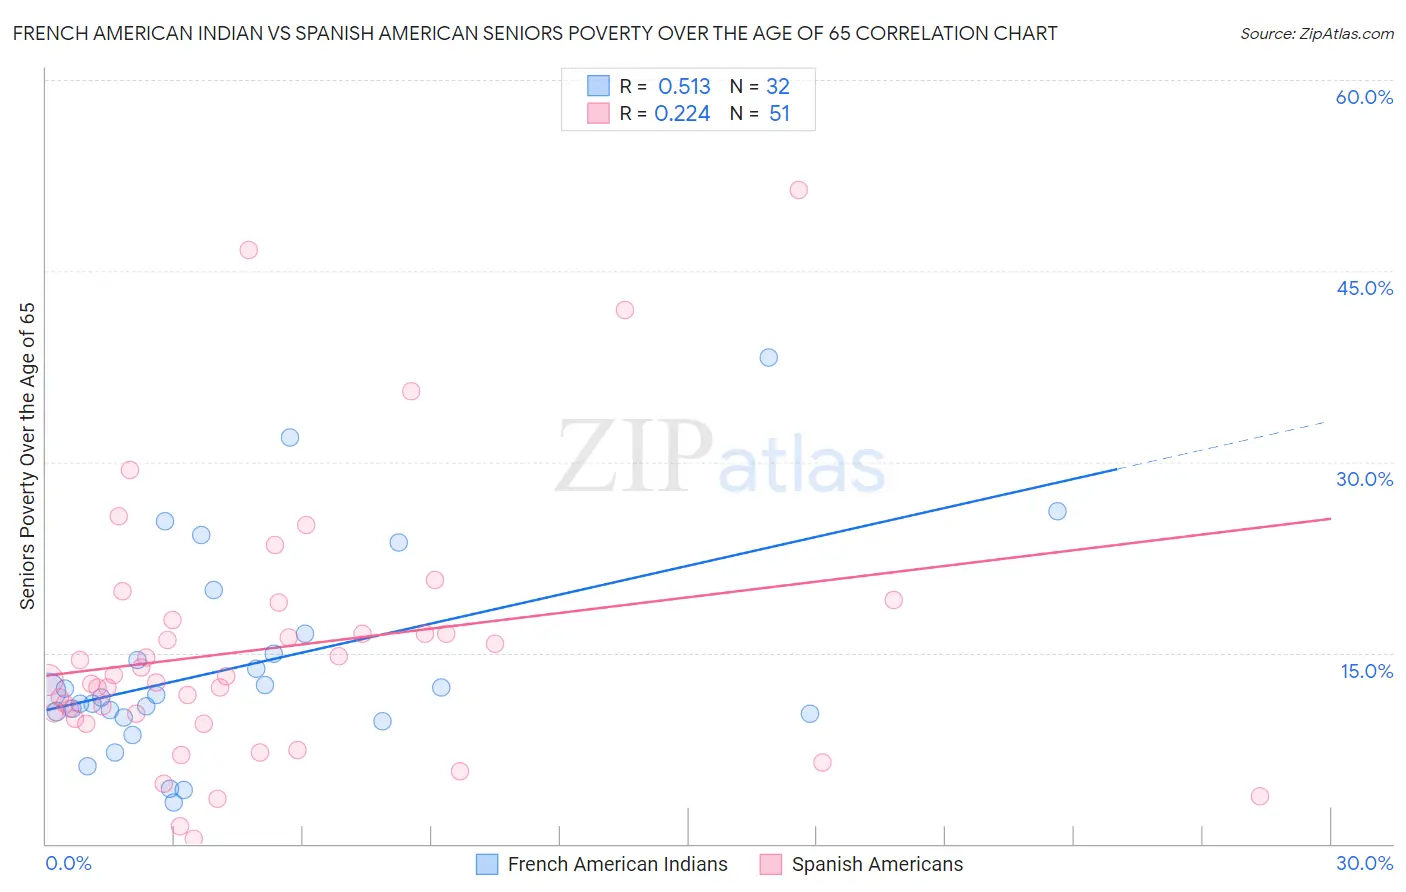 French American Indian vs Spanish American Seniors Poverty Over the Age of 65